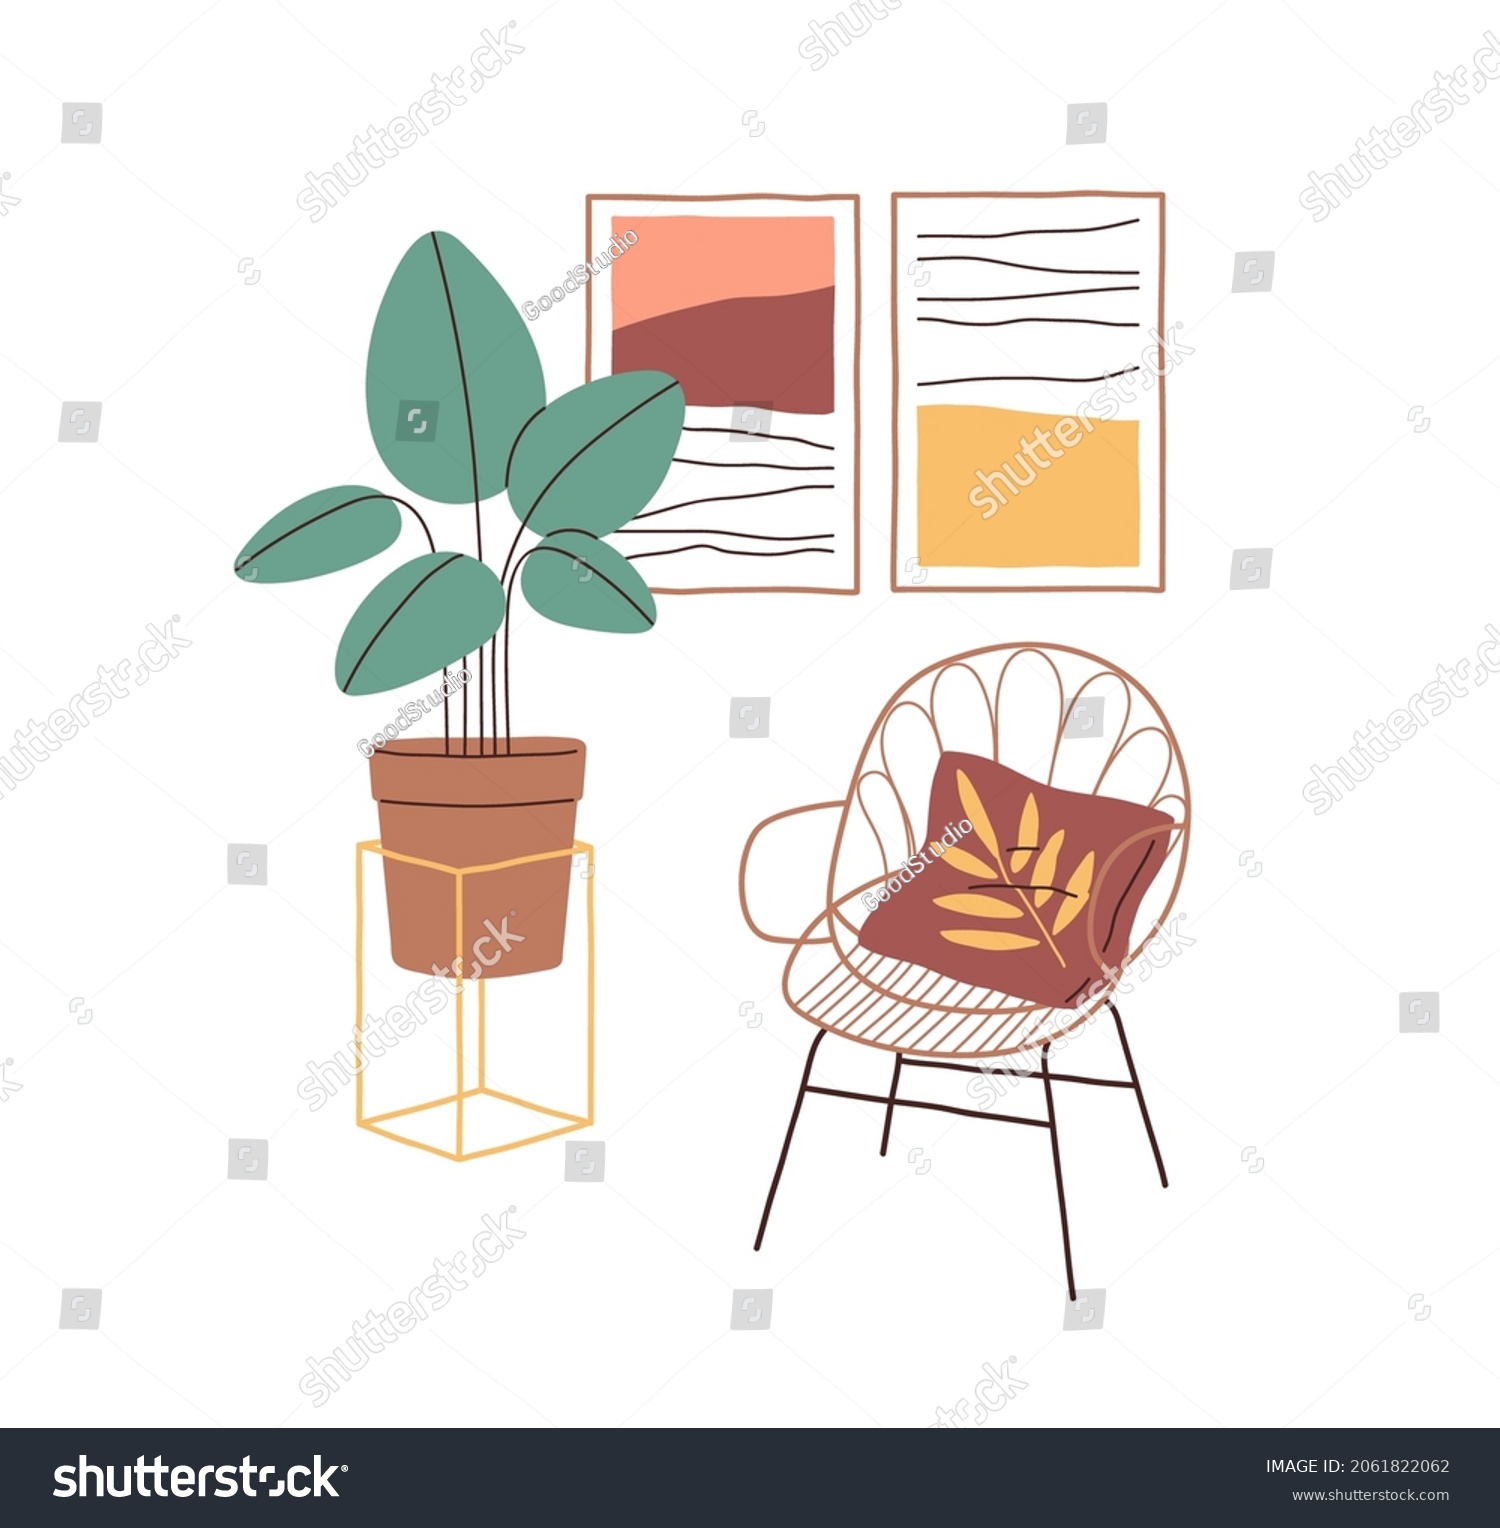 SVG of Interior design with armchair, potted plant and wall pictures. Cane chair with cushion, posters and houseplant. Home in minimalism style. Colored flat vector illustration isolated on white background svg